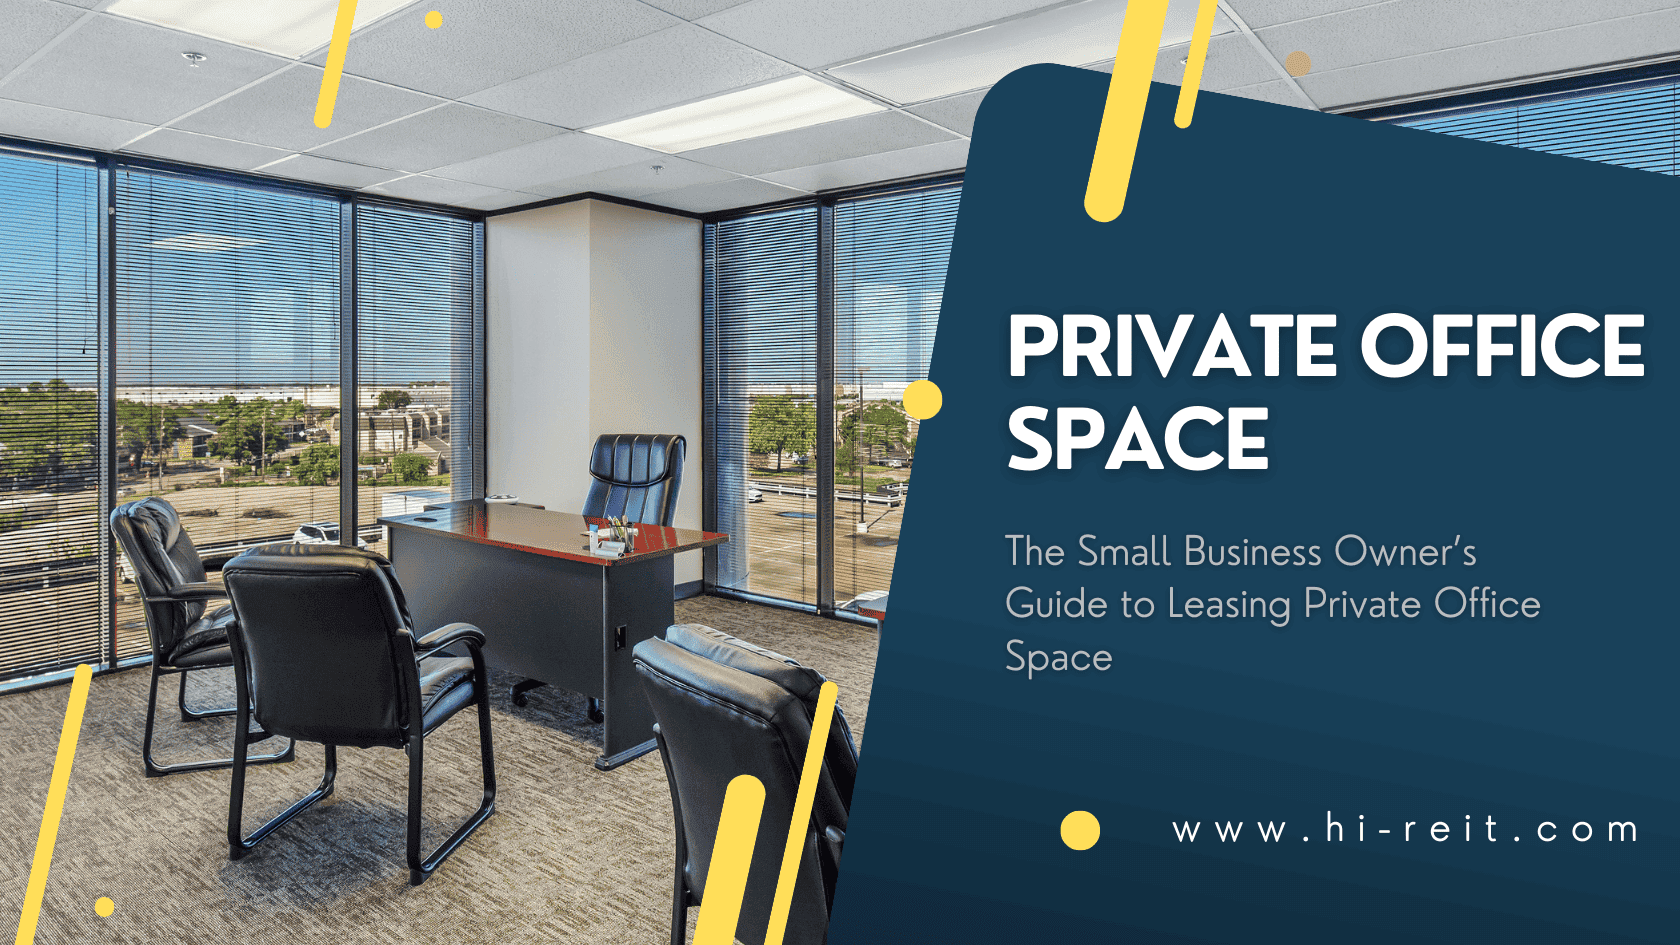 Should You Rent a Private Office? The Small Business Owner’s Guide to Private Office Space